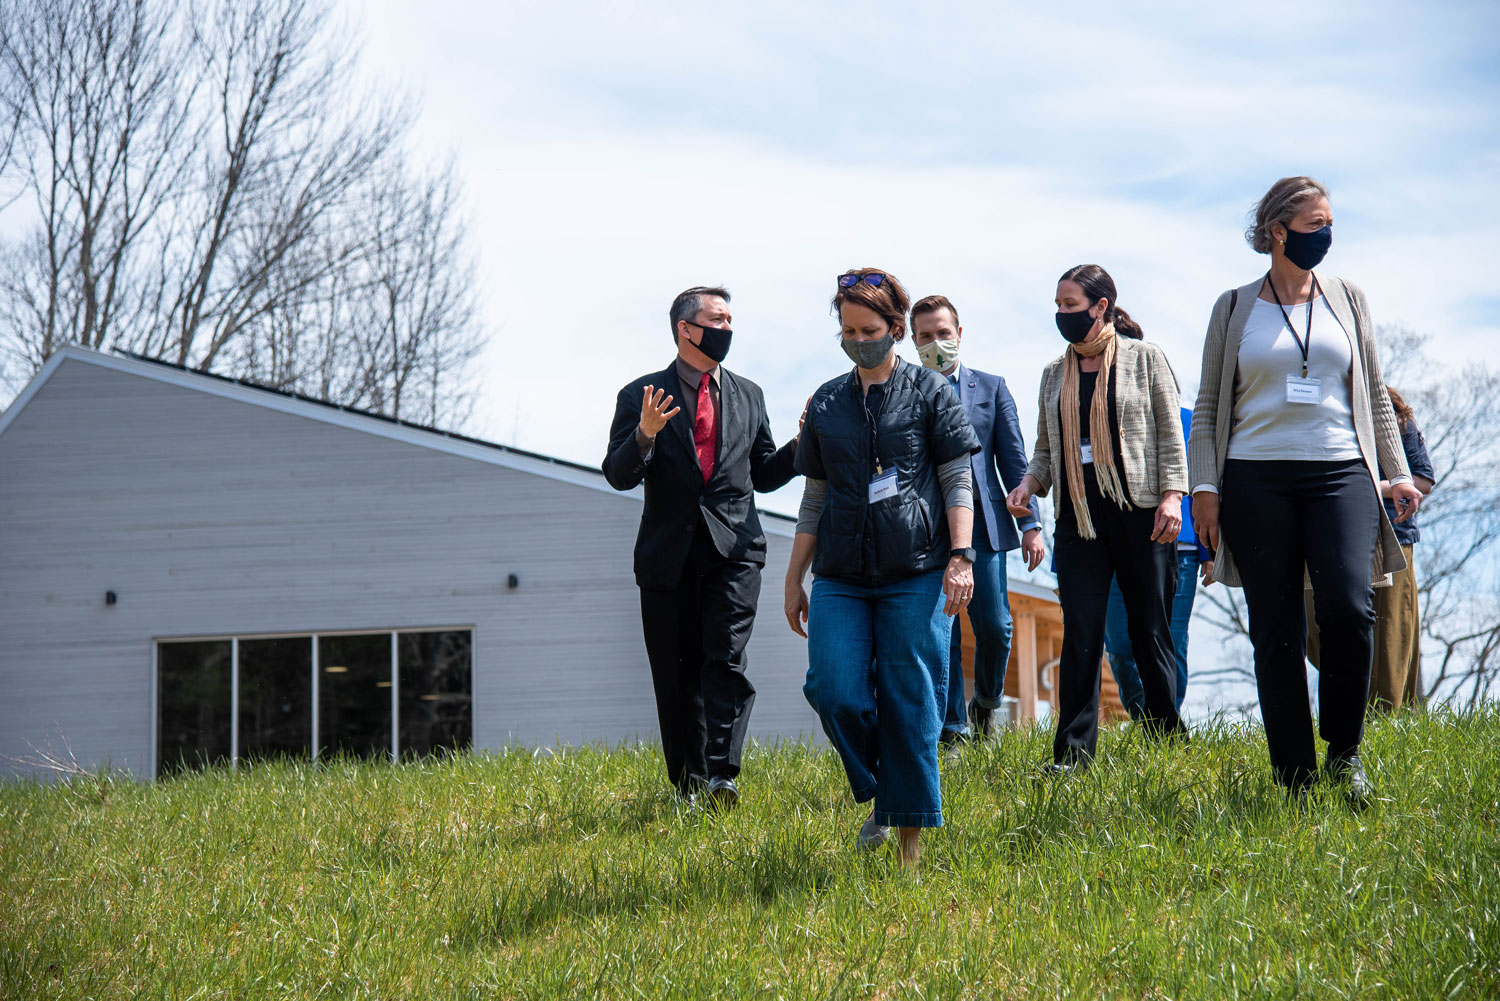 Drew Dumsch (far left) gives a tour during the ribbon cutting ceremony for River Bend Farm on April 24, 2021.